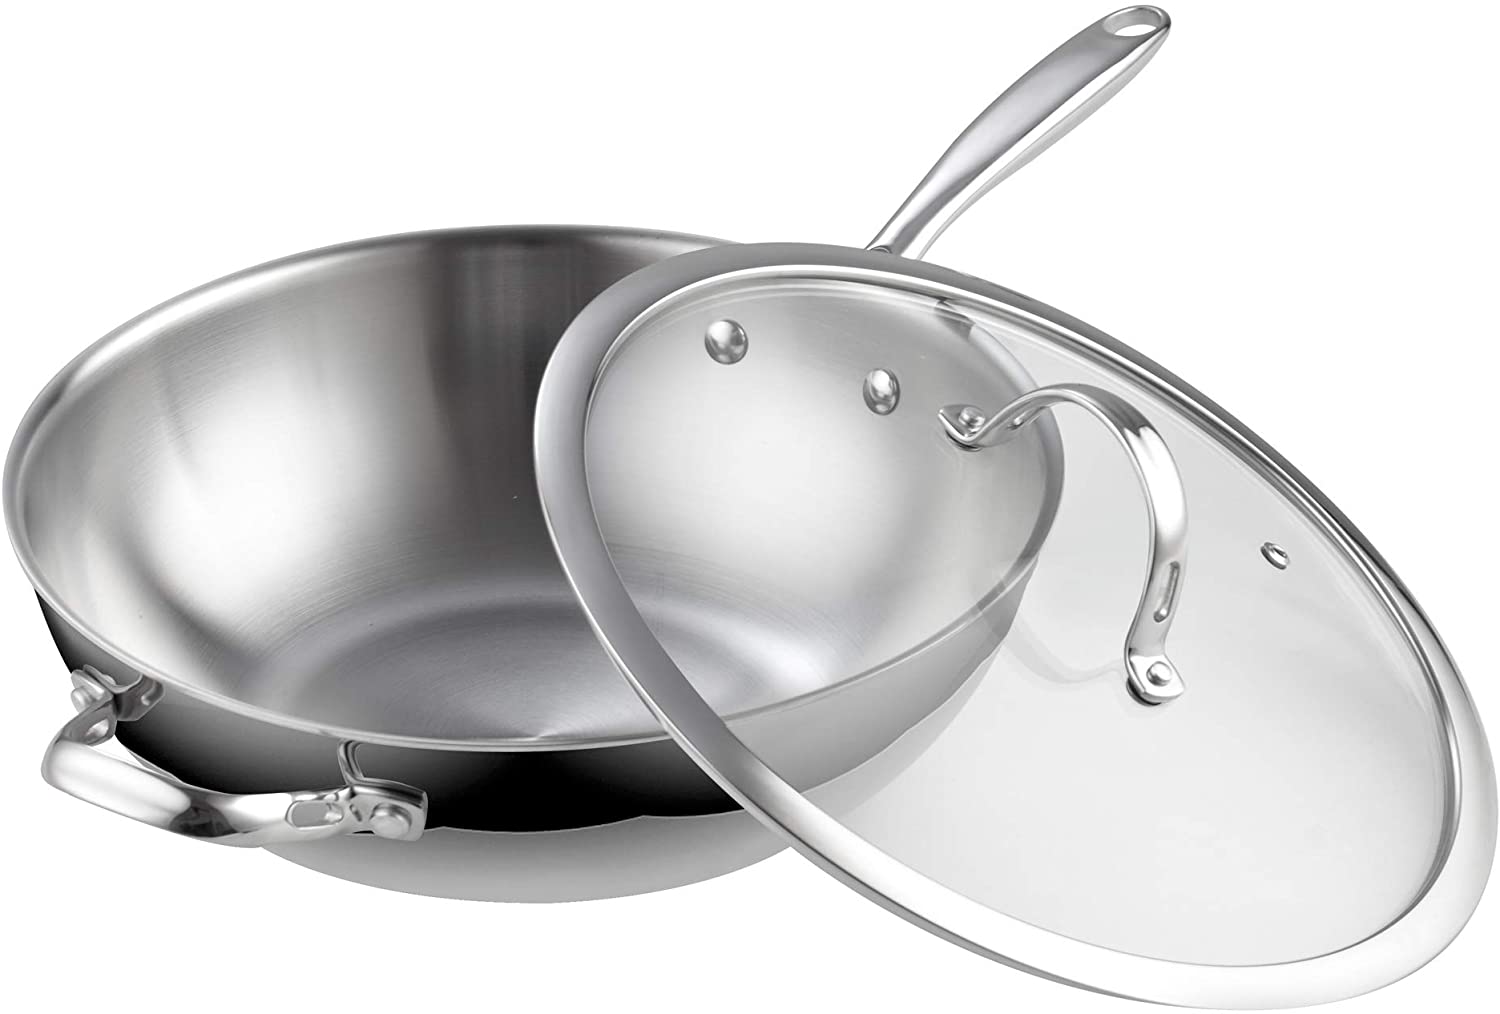 12 Clad Wok with Lid, High End Cooking Wok